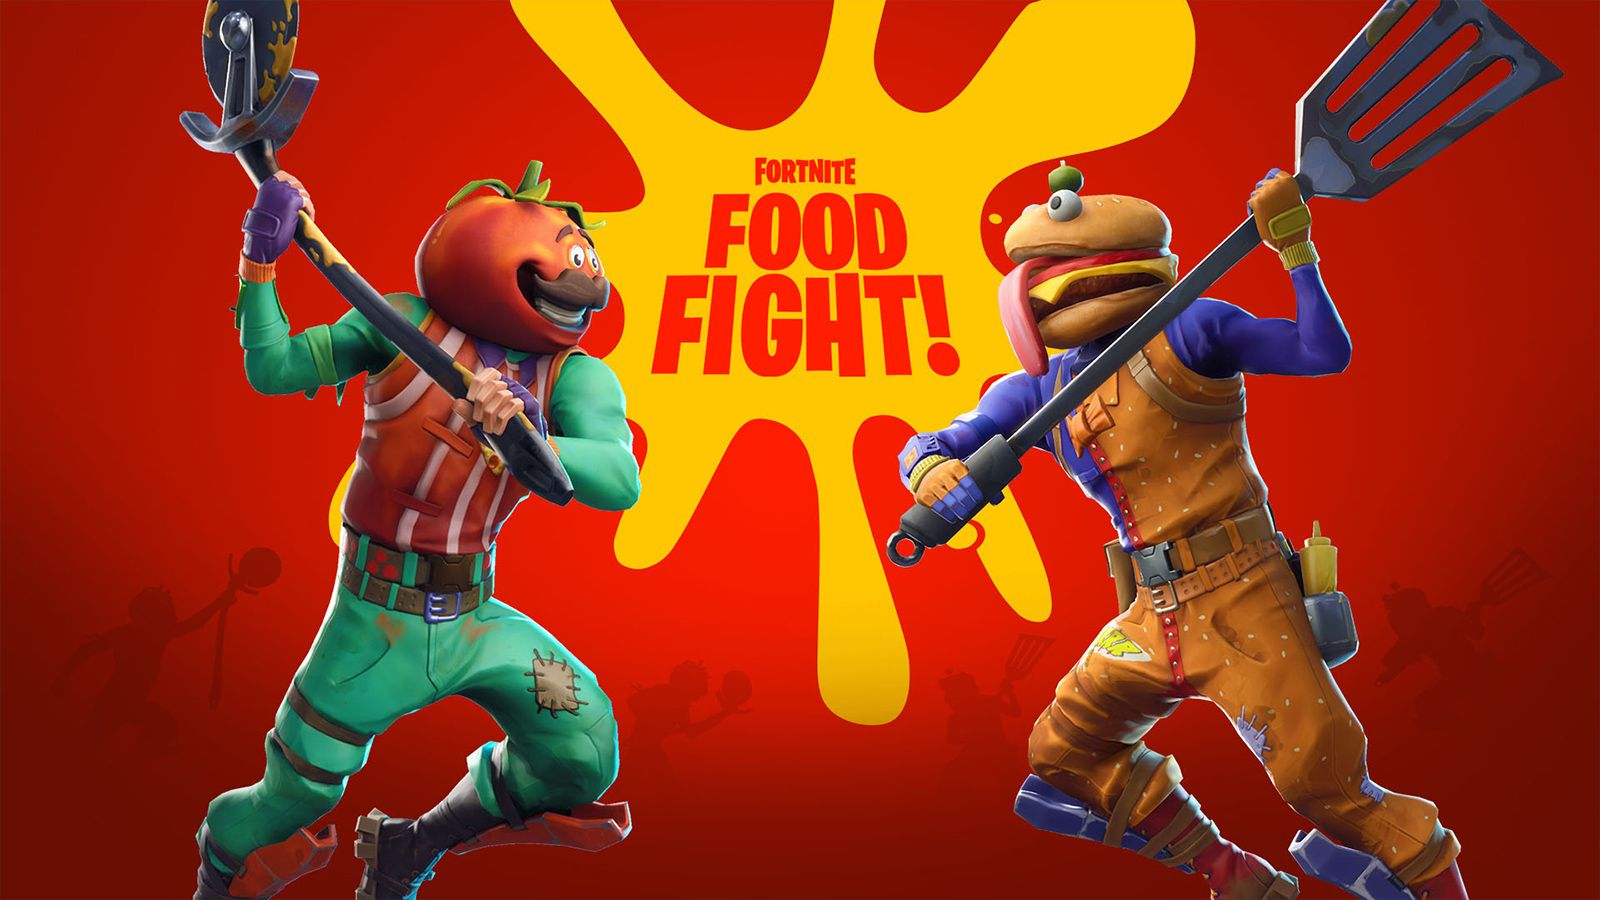 Patch Notes for v6.30 - Mounted Turret, Food Fight LTM, and more